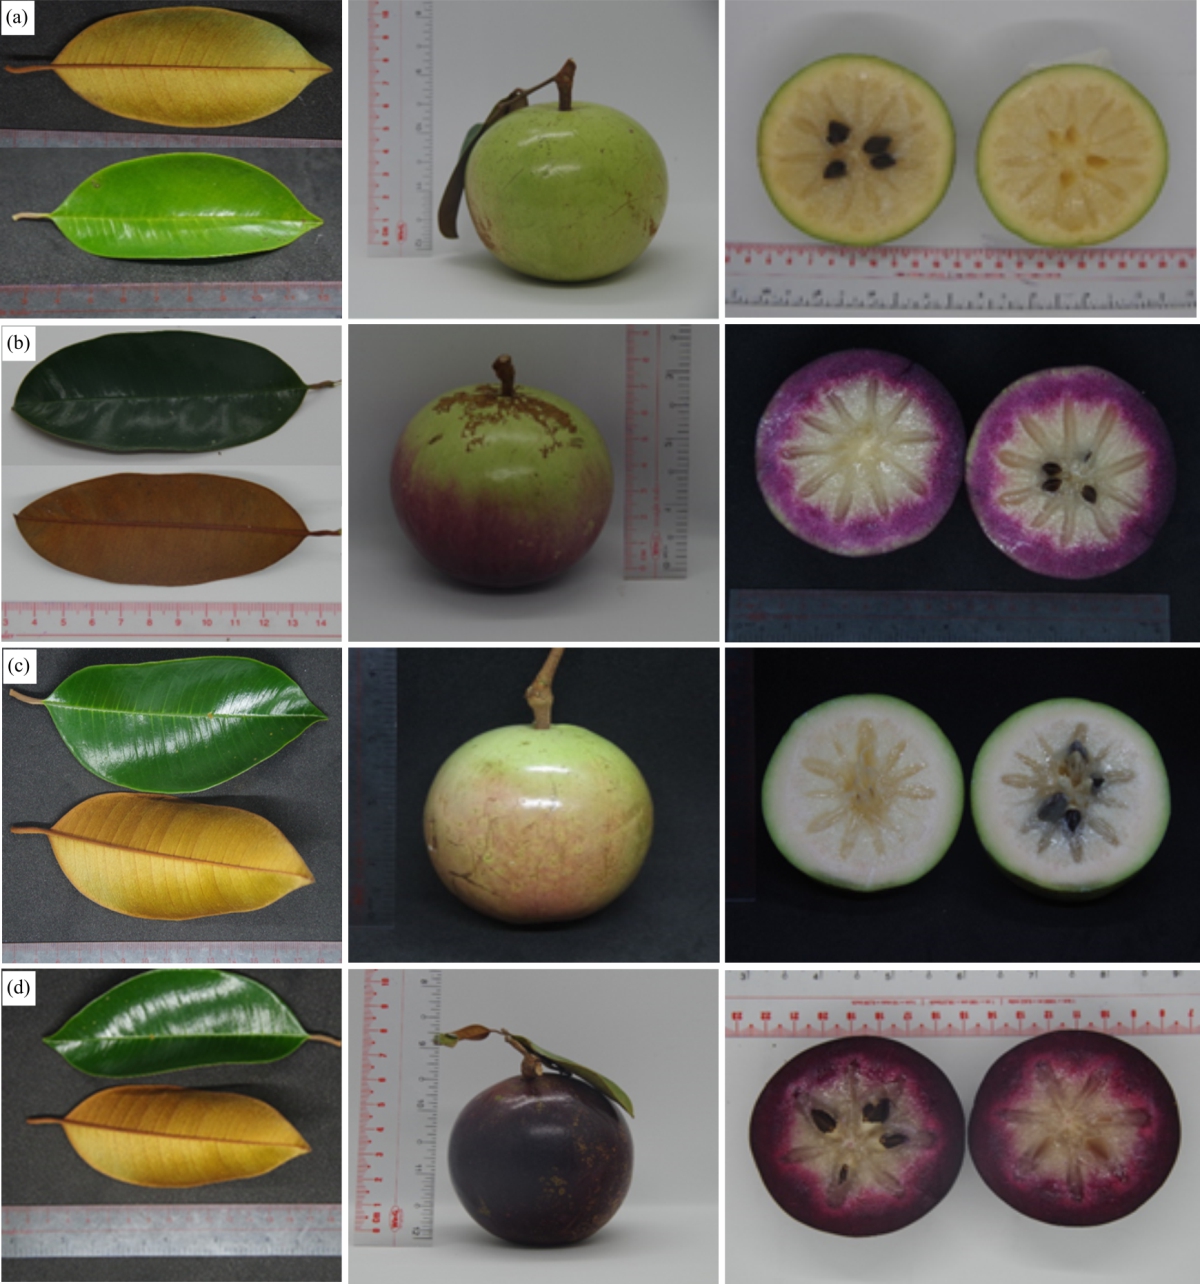 Image for - Morphological Characteristics and Genetic Relations of the Star Apple Varieties (Chrysophyllum cainito L.)